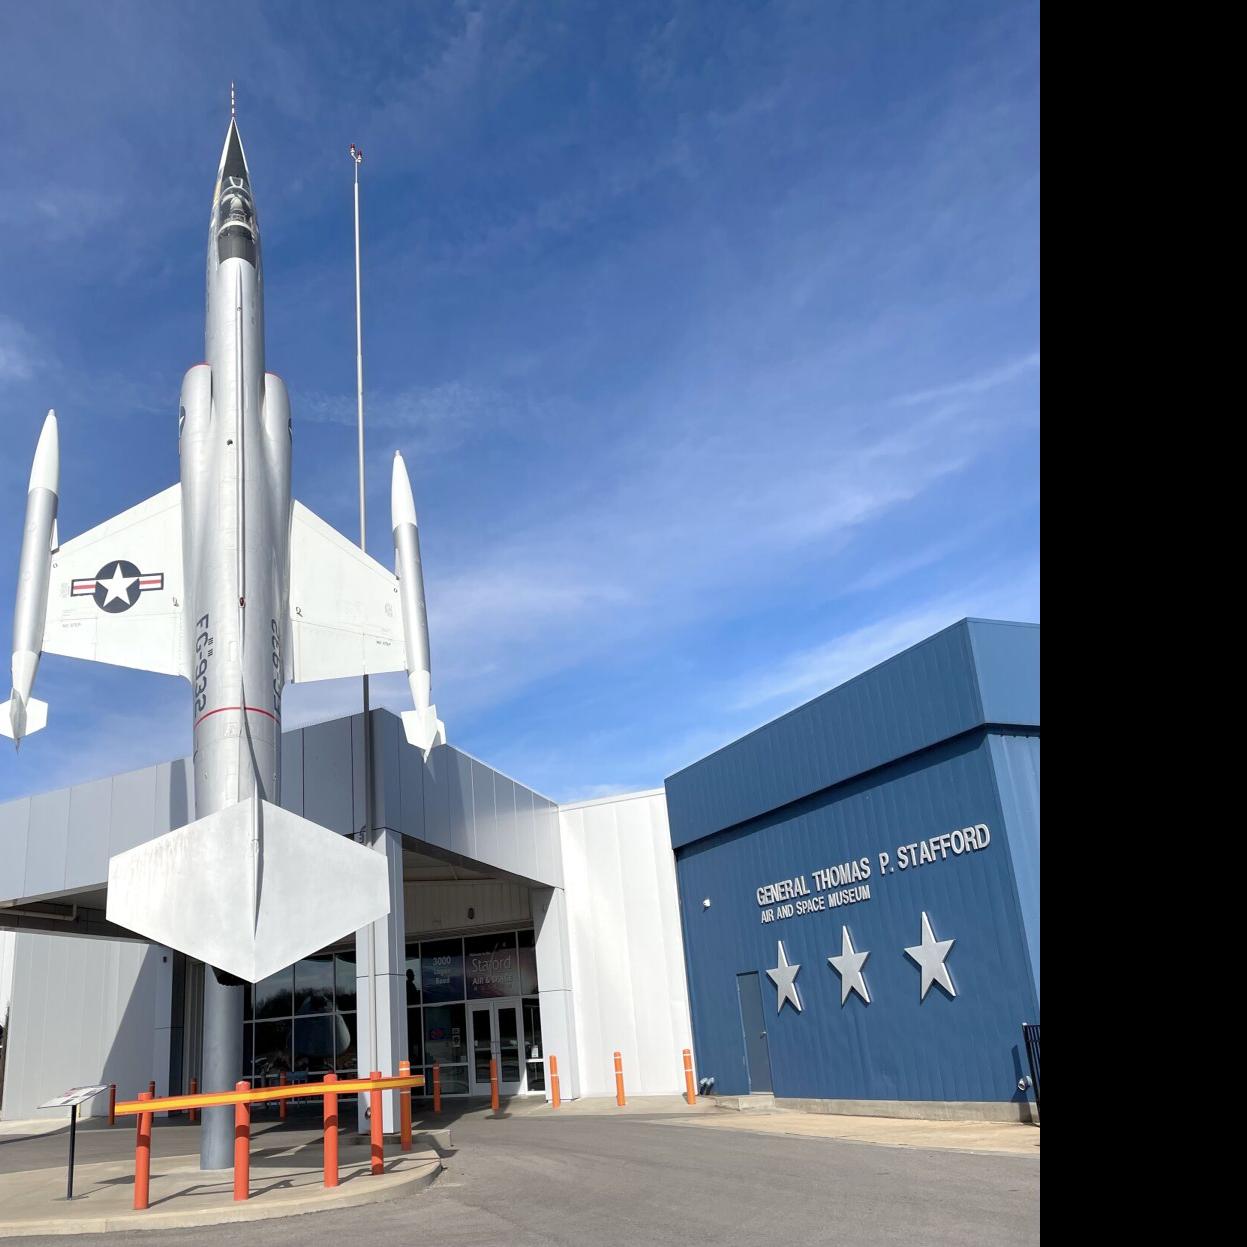 TRAVEL COLUMN: Air and space museum celebrates Thomas Stafford, Community